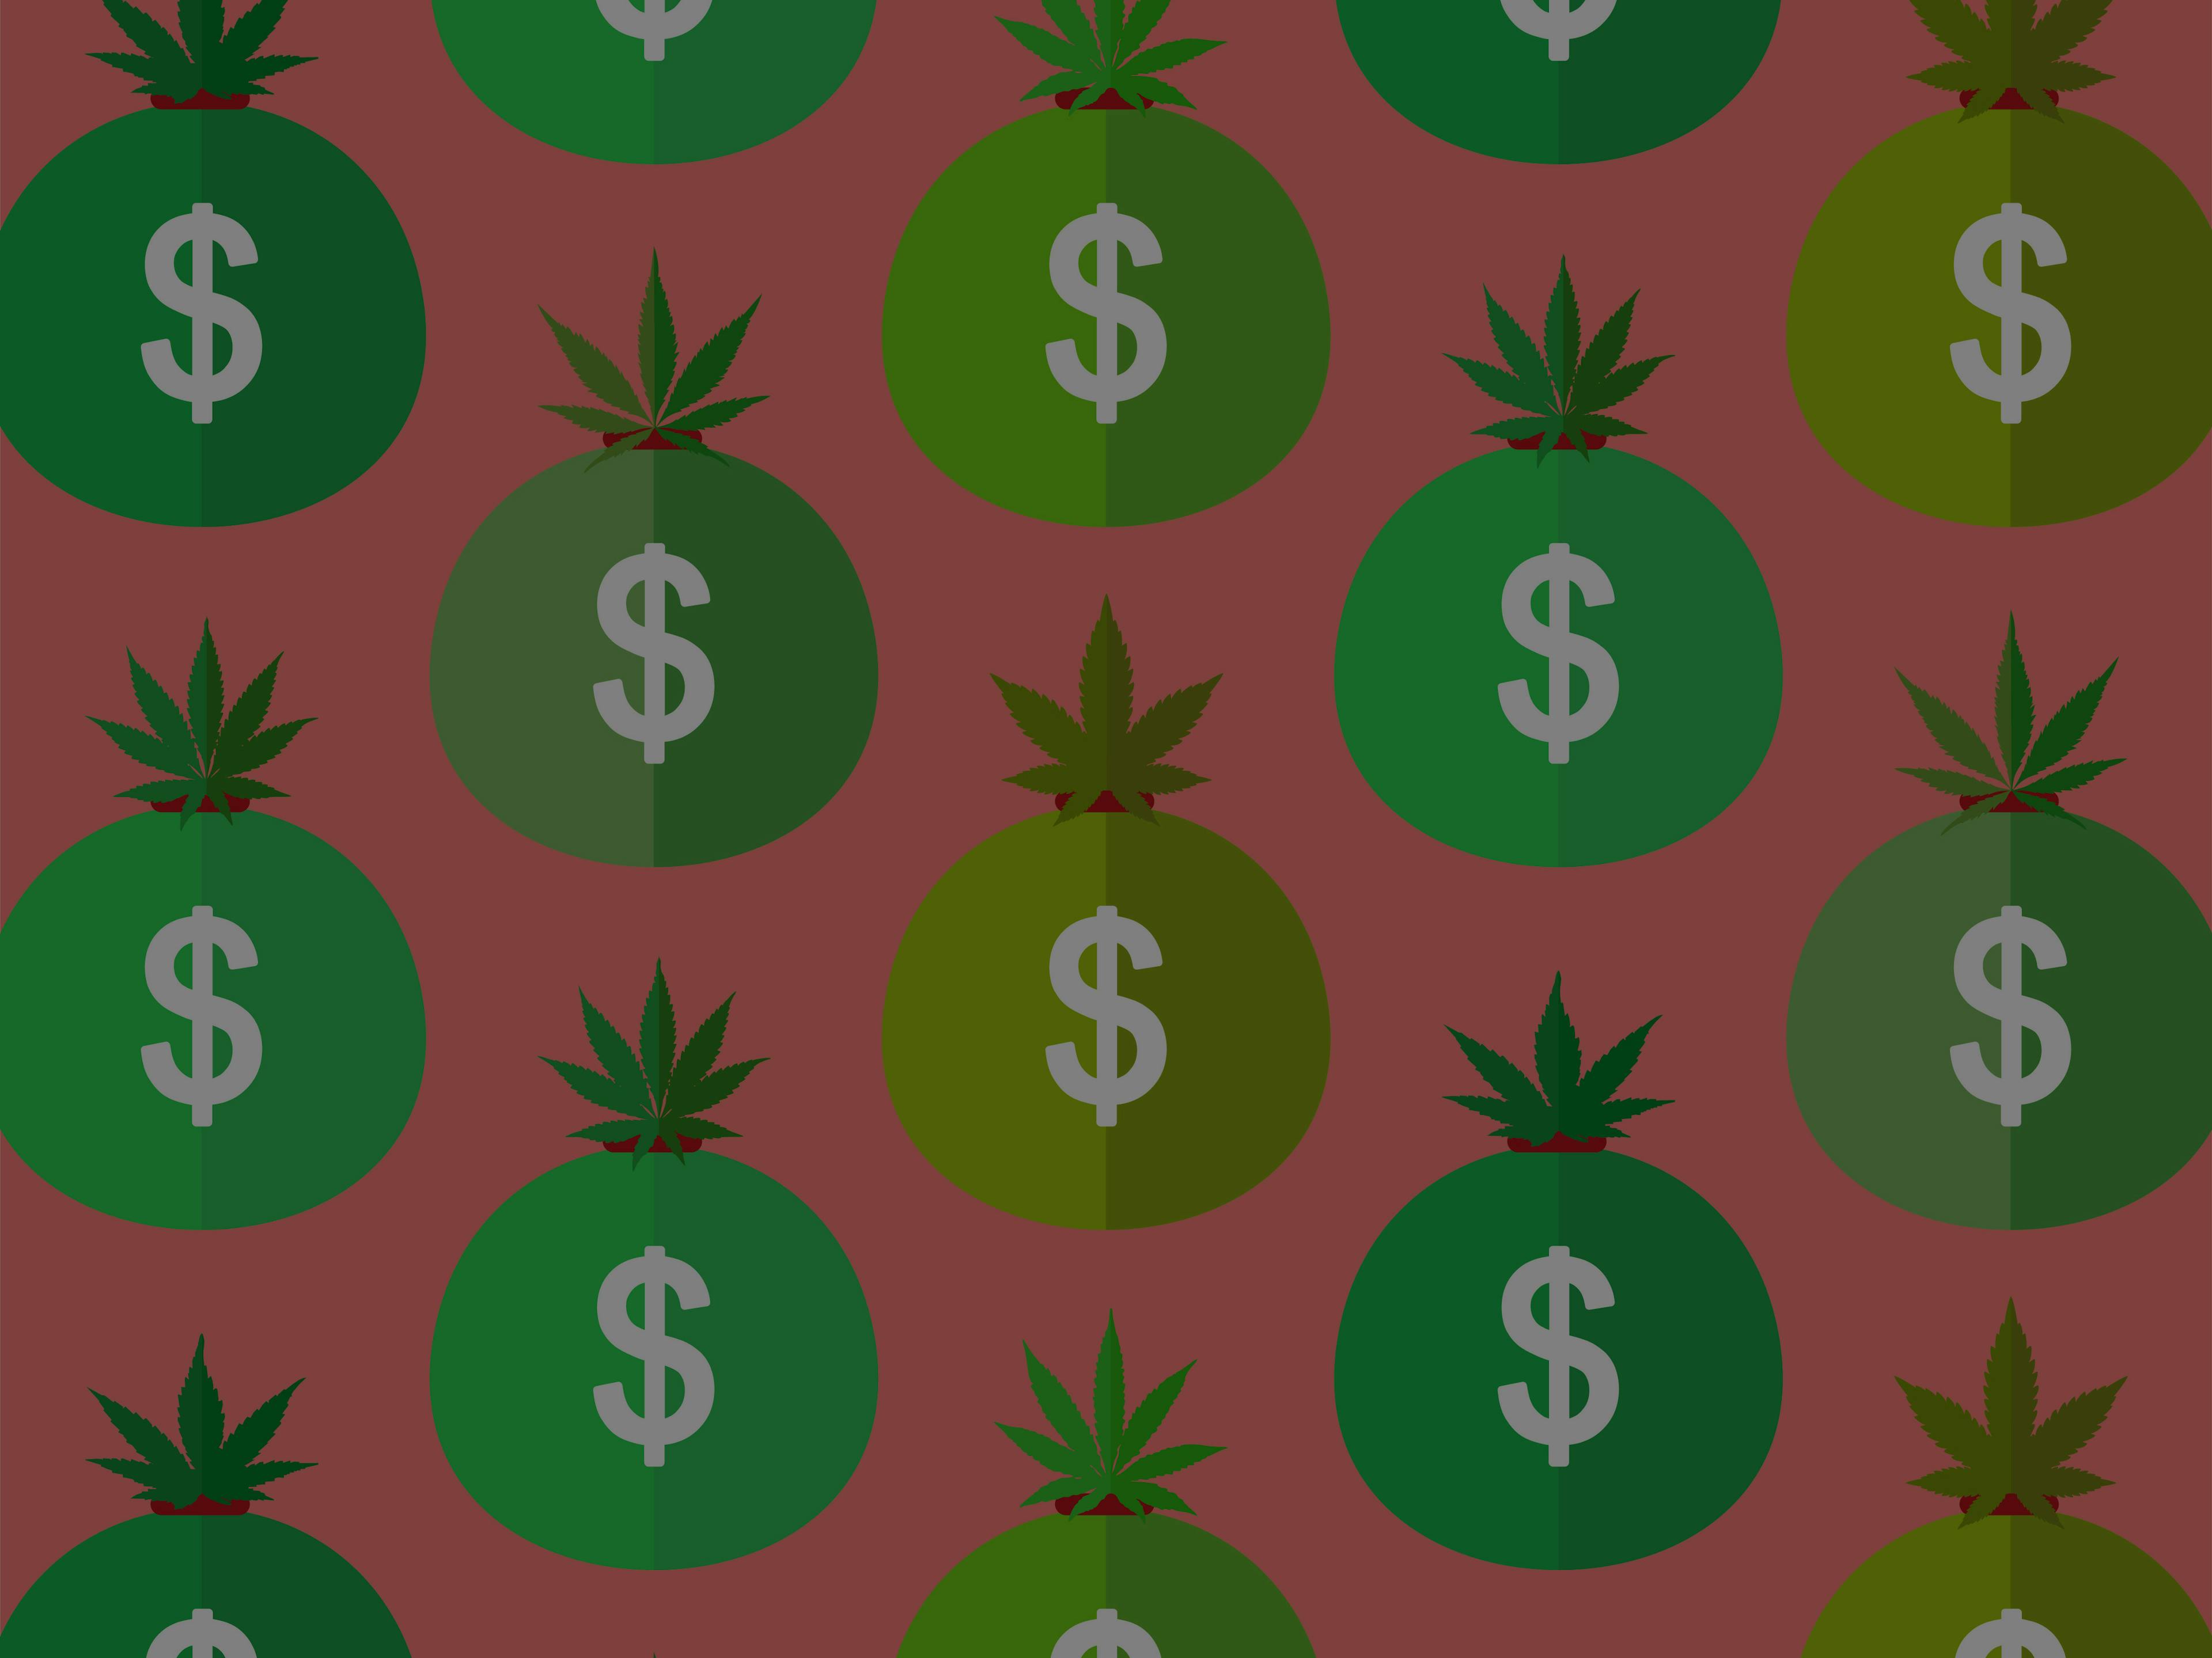 nyc brand purpose agency graphic for movement to legalize marijuana